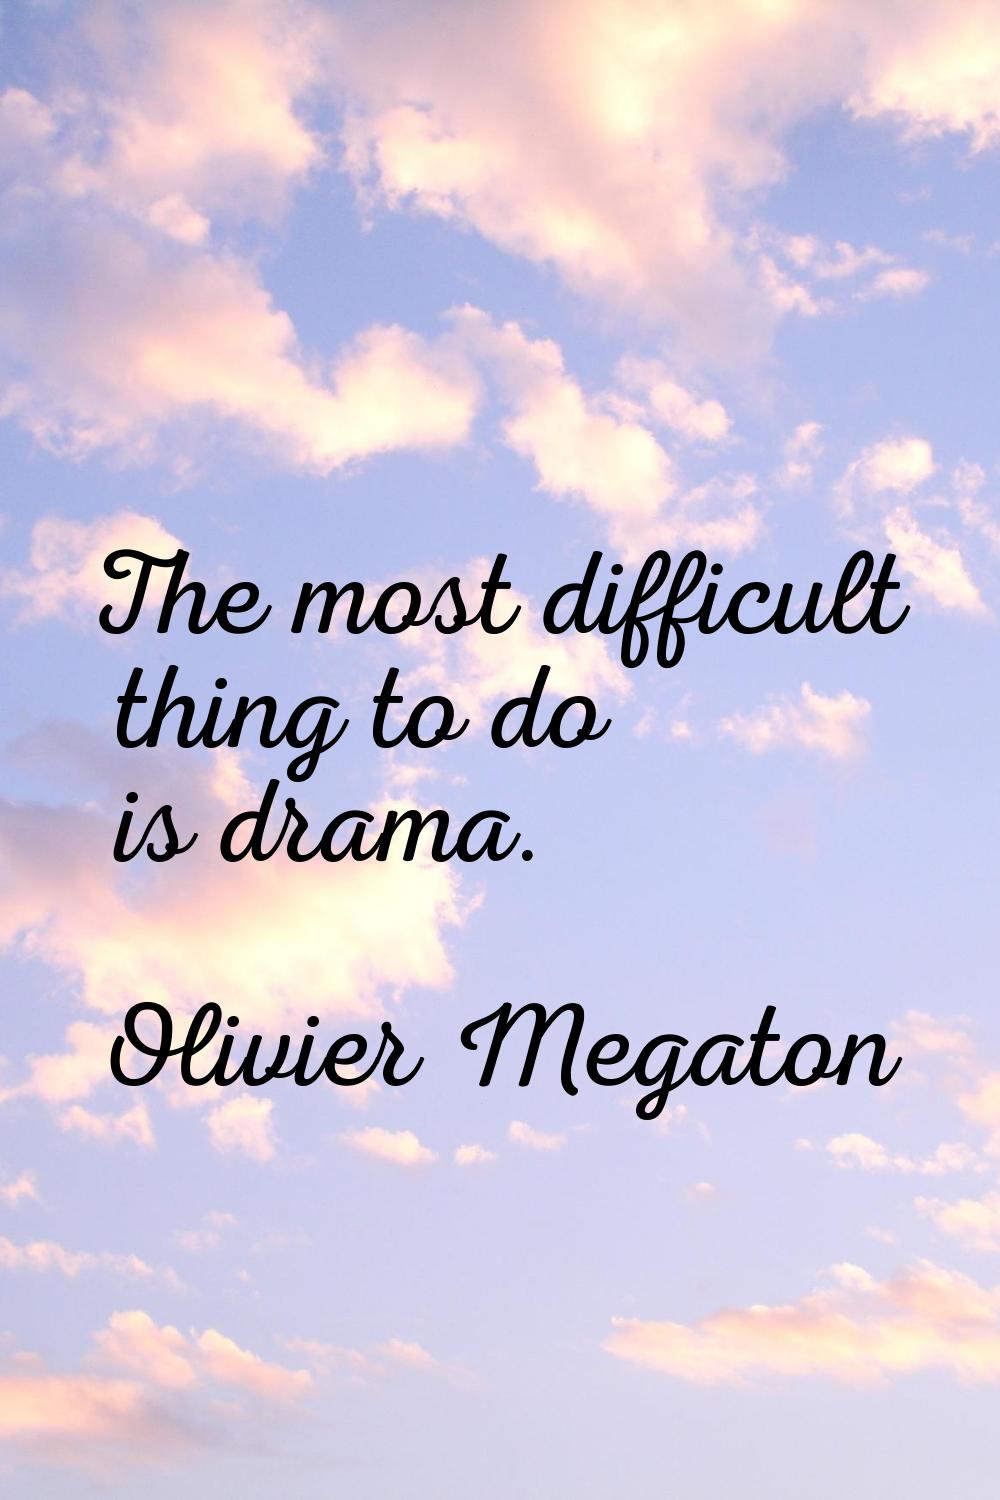 The most difficult thing to do is drama.